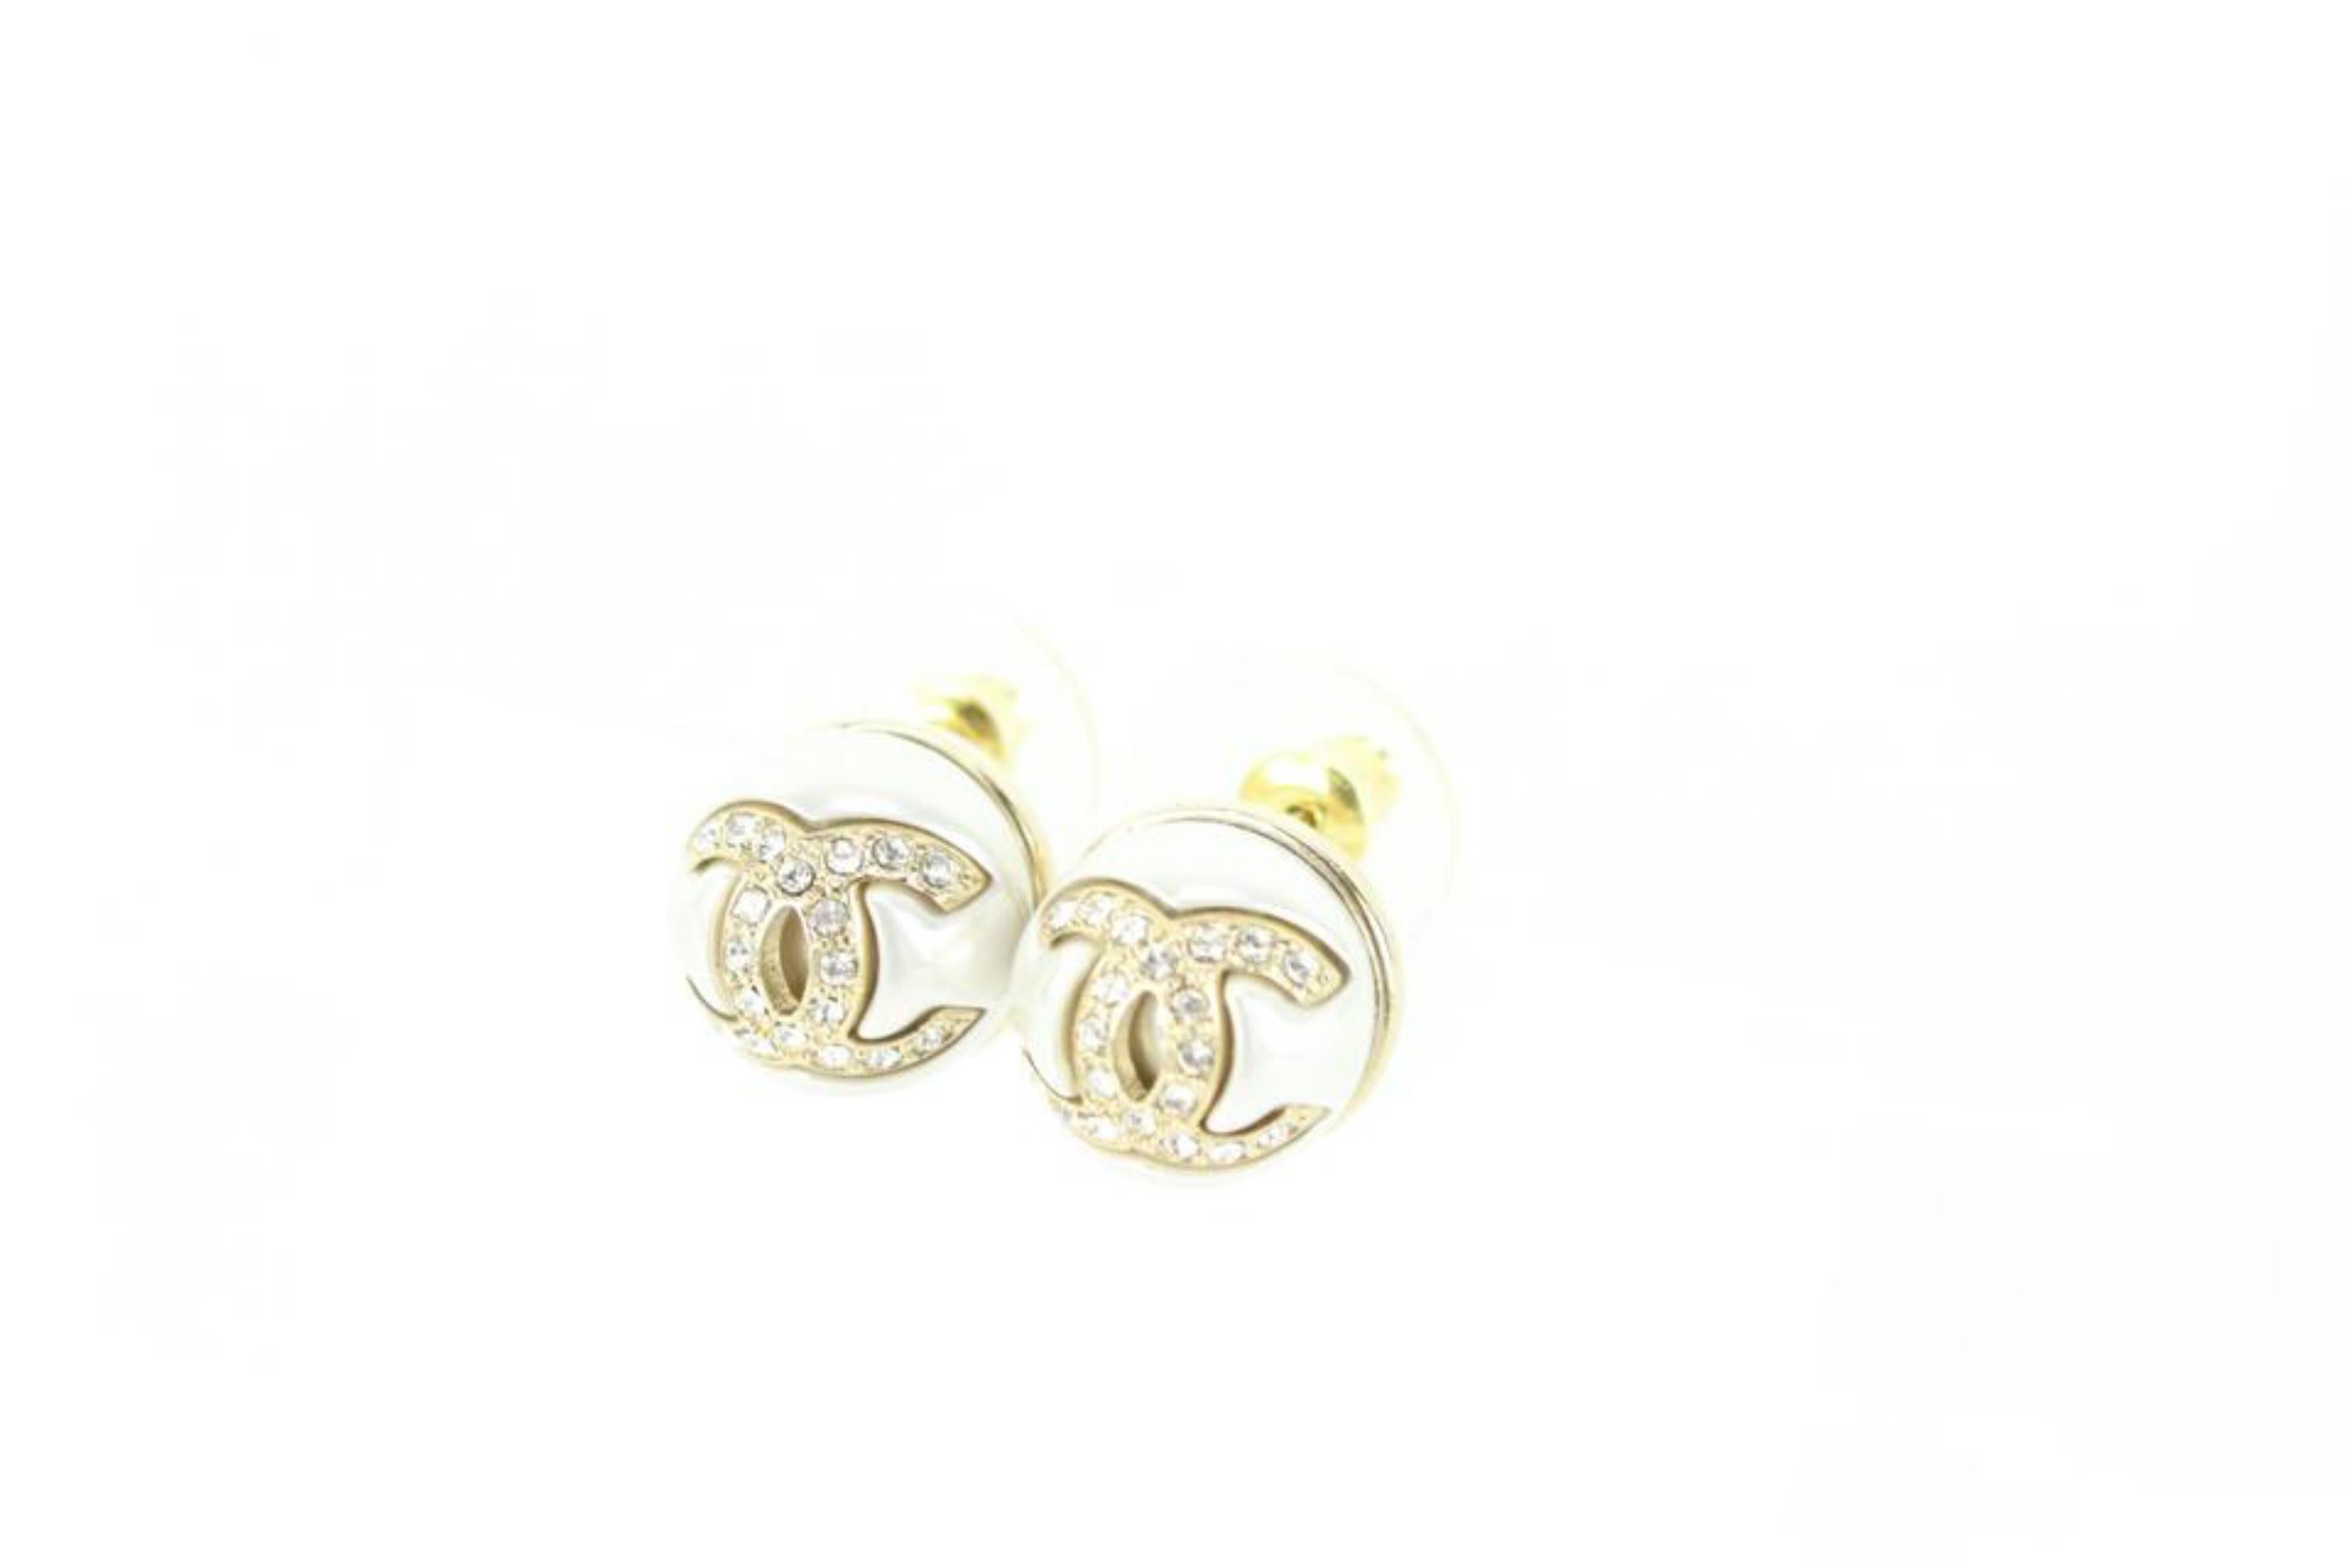 Chanel Pearl CC Logo Gold Plated Post Earrings